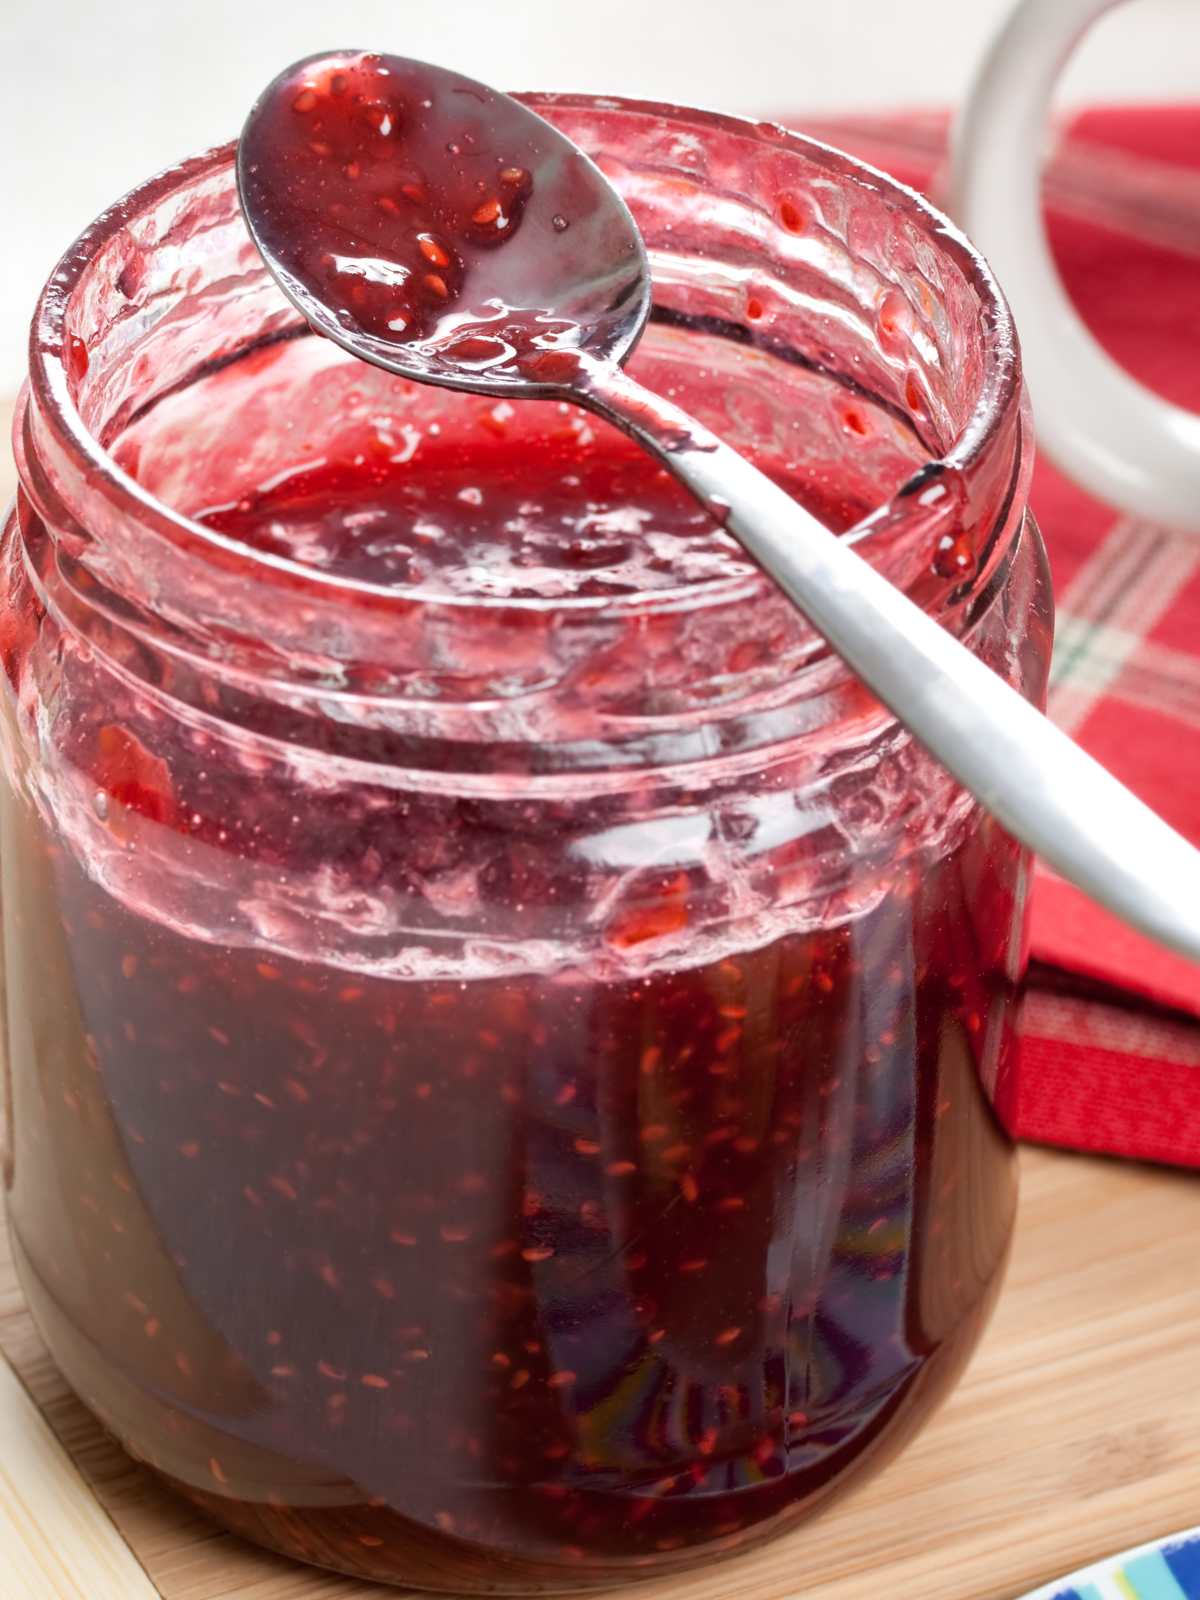 A jar of raspberry jam with a spoon resting on top.